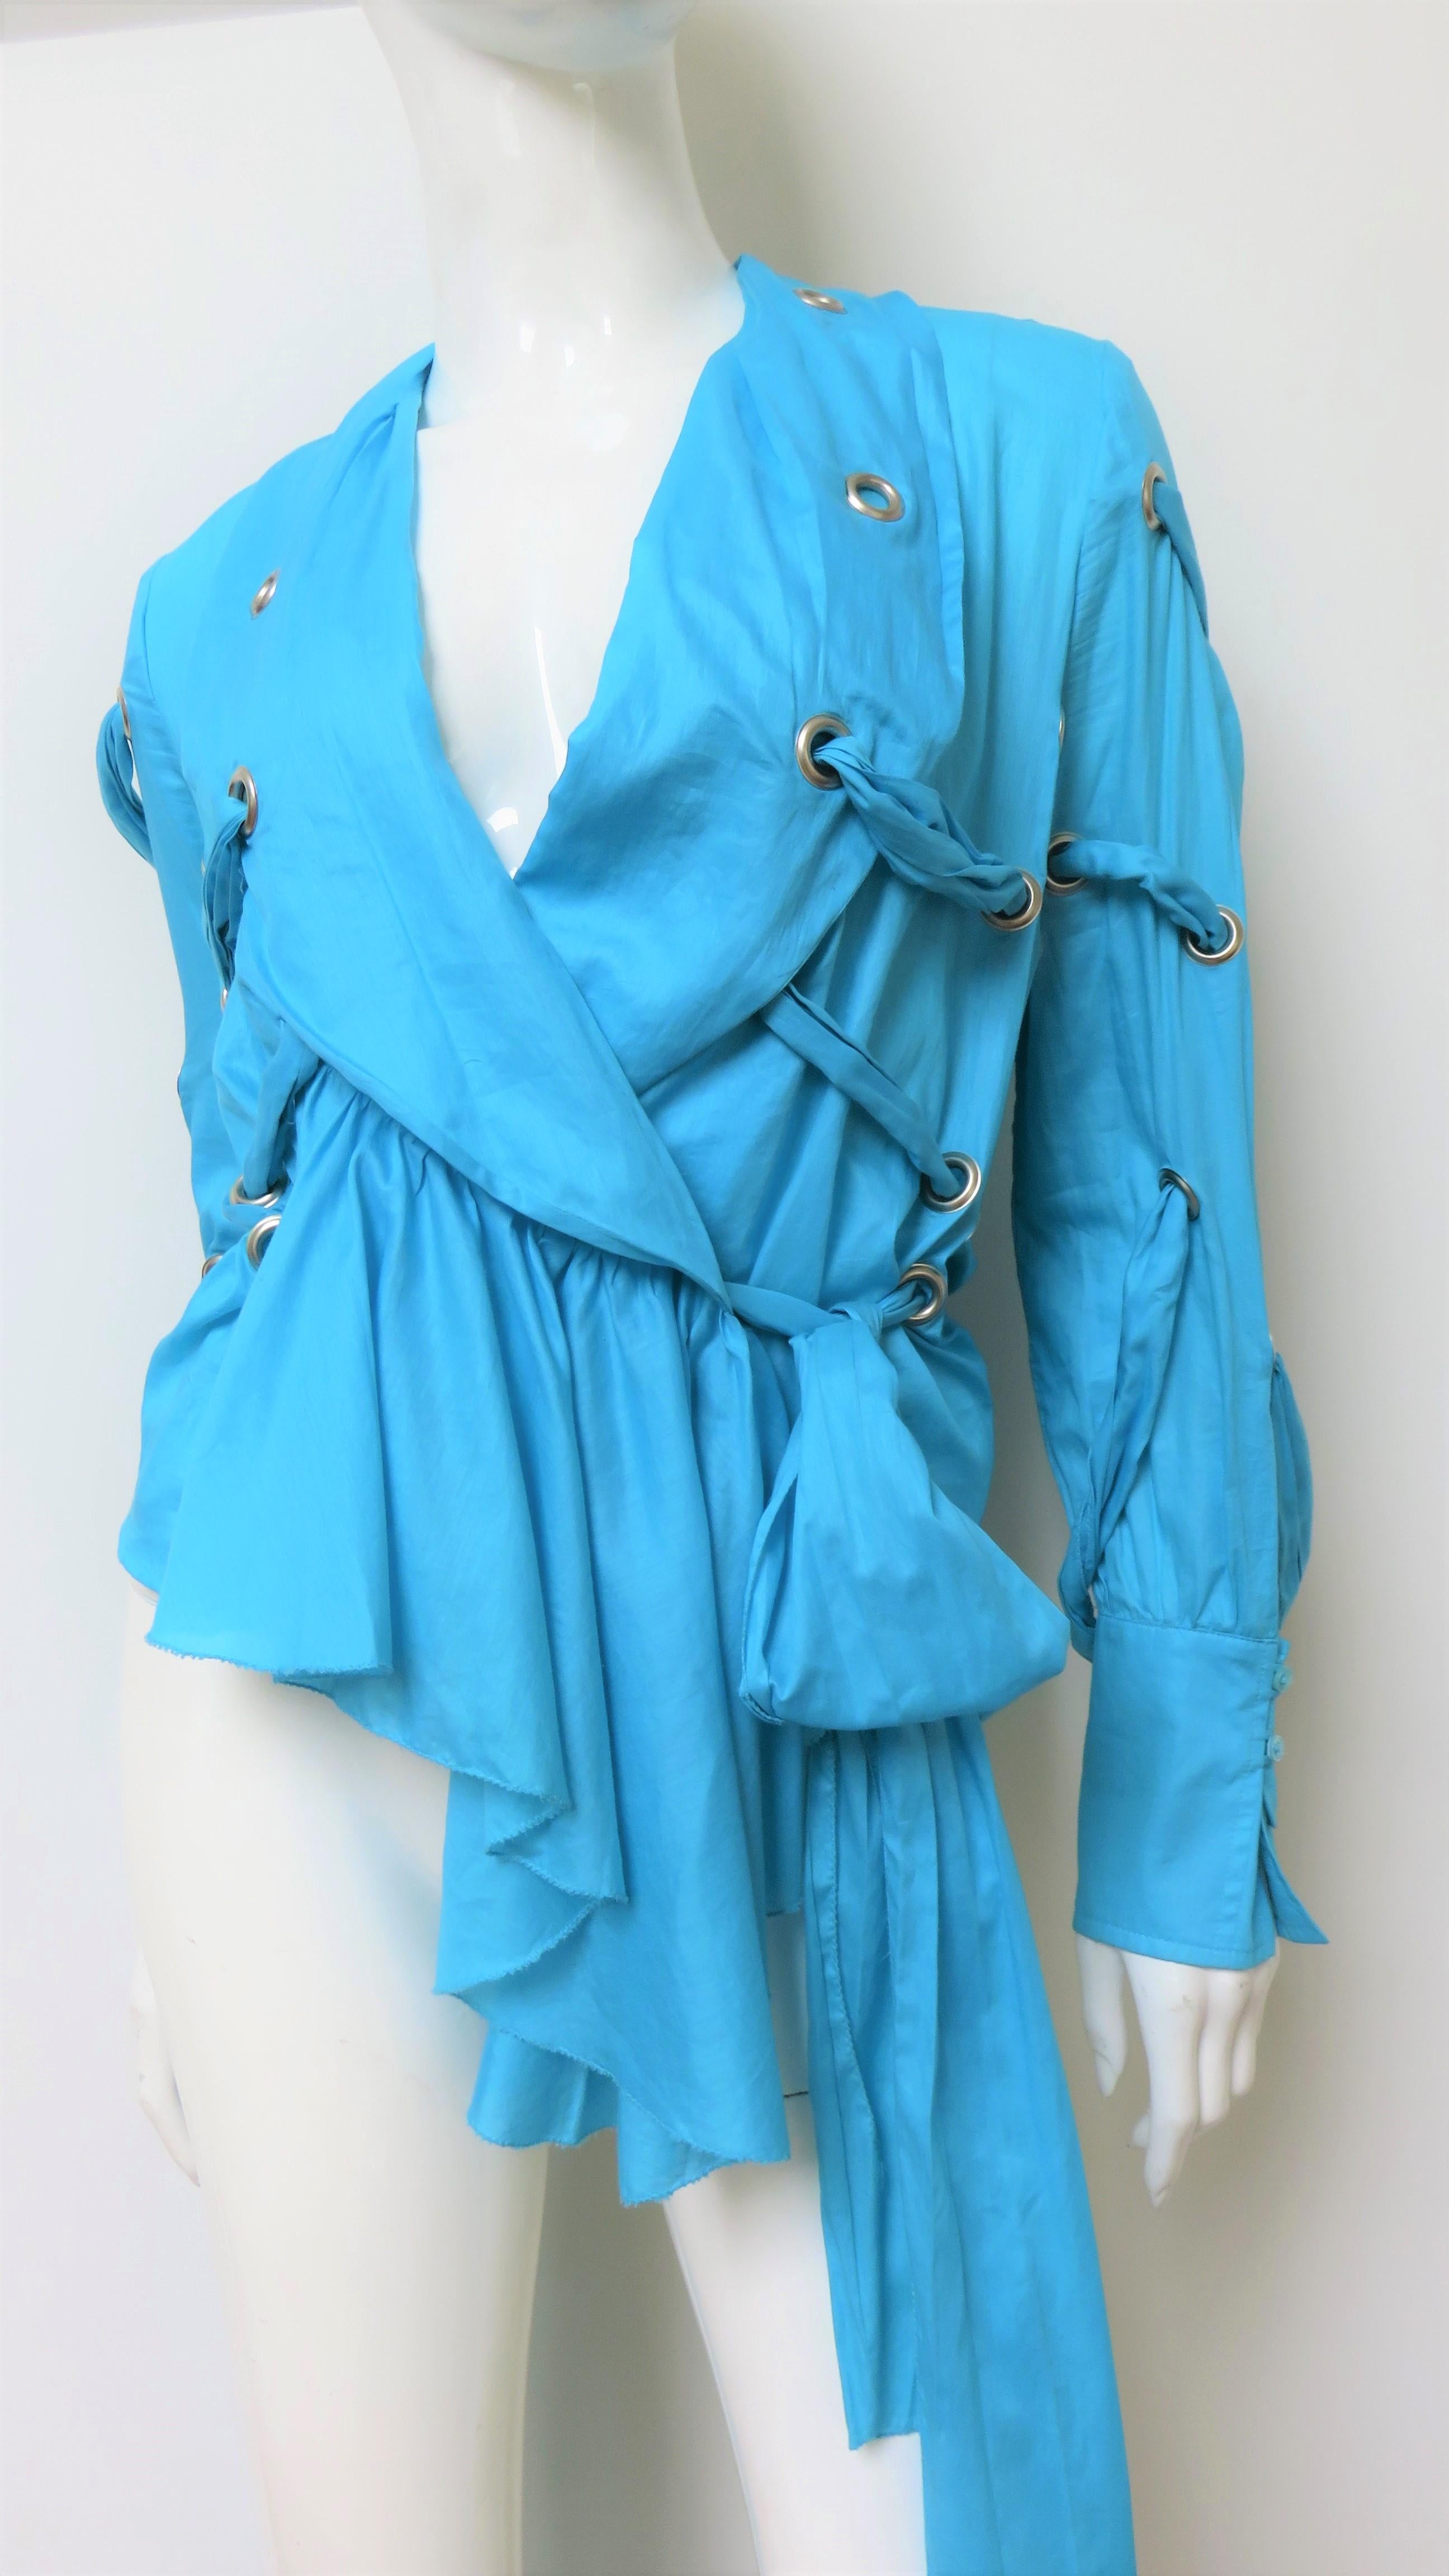 A fabulous bright blue fine cotton shirt, top, blouse by Antonio Berardi.  It has a shawl collar, matching mother of pearl button cuffs, and an asymmetrical hem longer in the front. The shirt has grommets in various locations and matching straps to